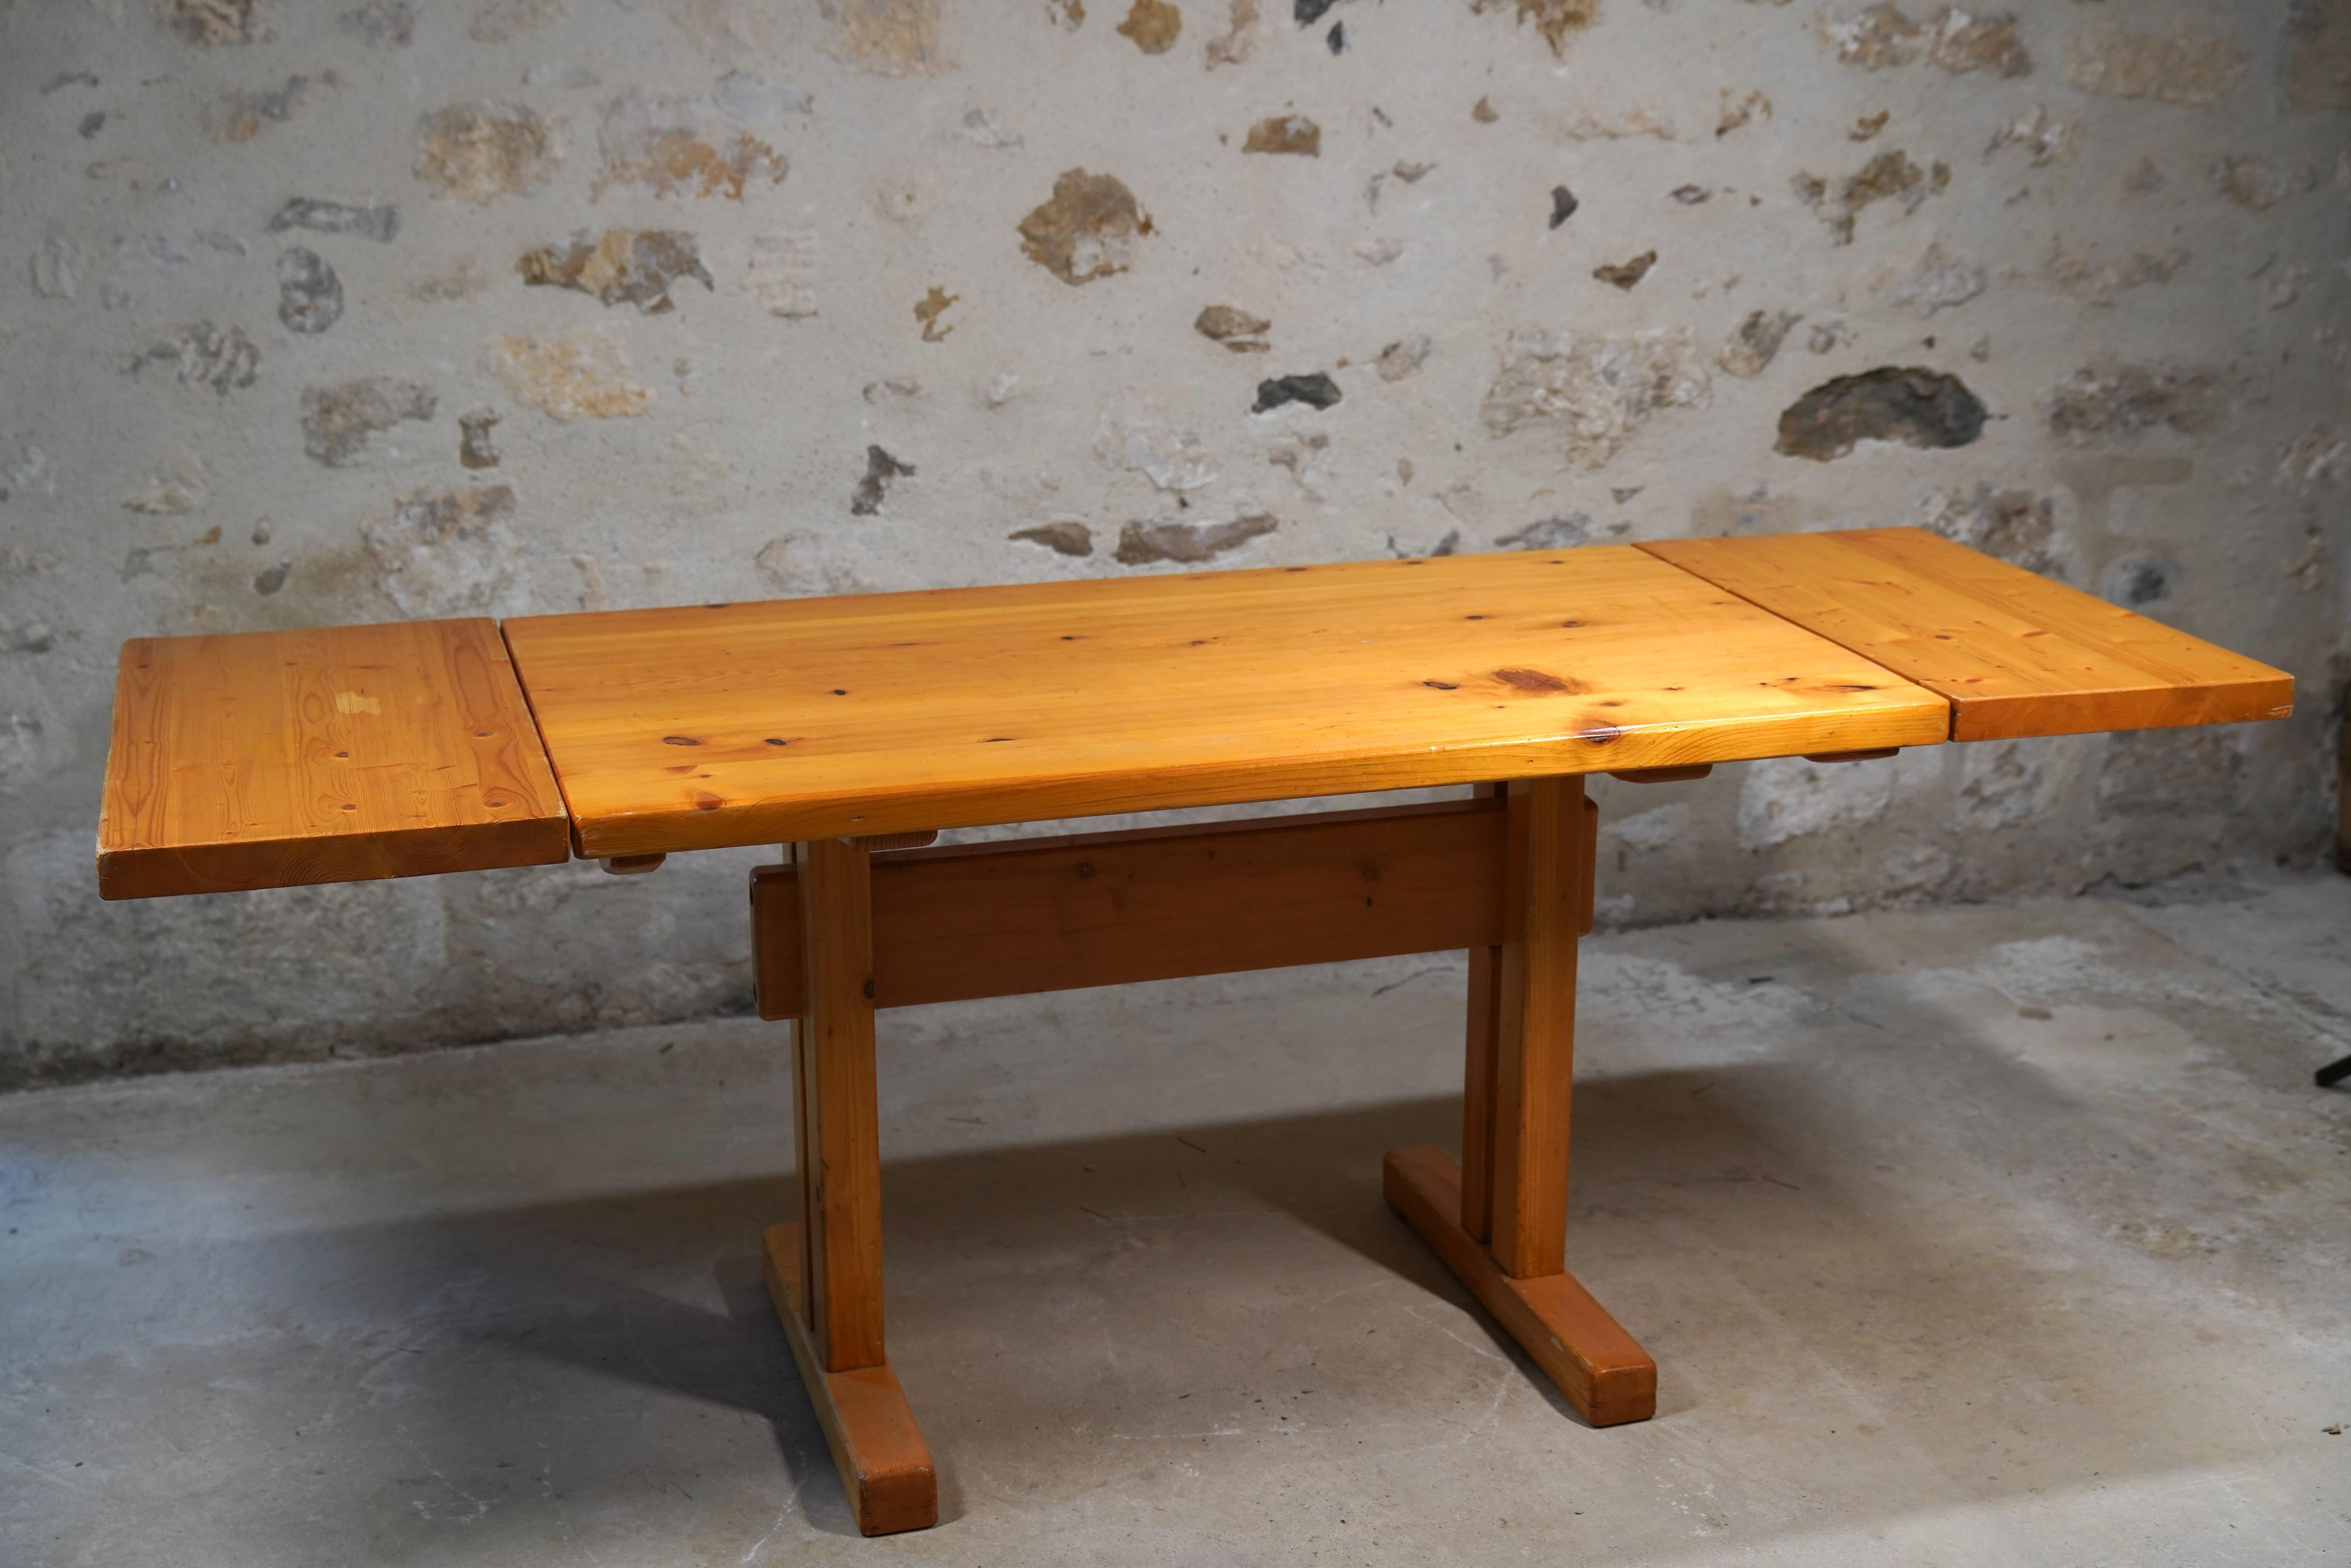 Late 20th Century Rare Charlotte Perriand Drop Leaf Dining Table from Les Arcs, France c. 1970